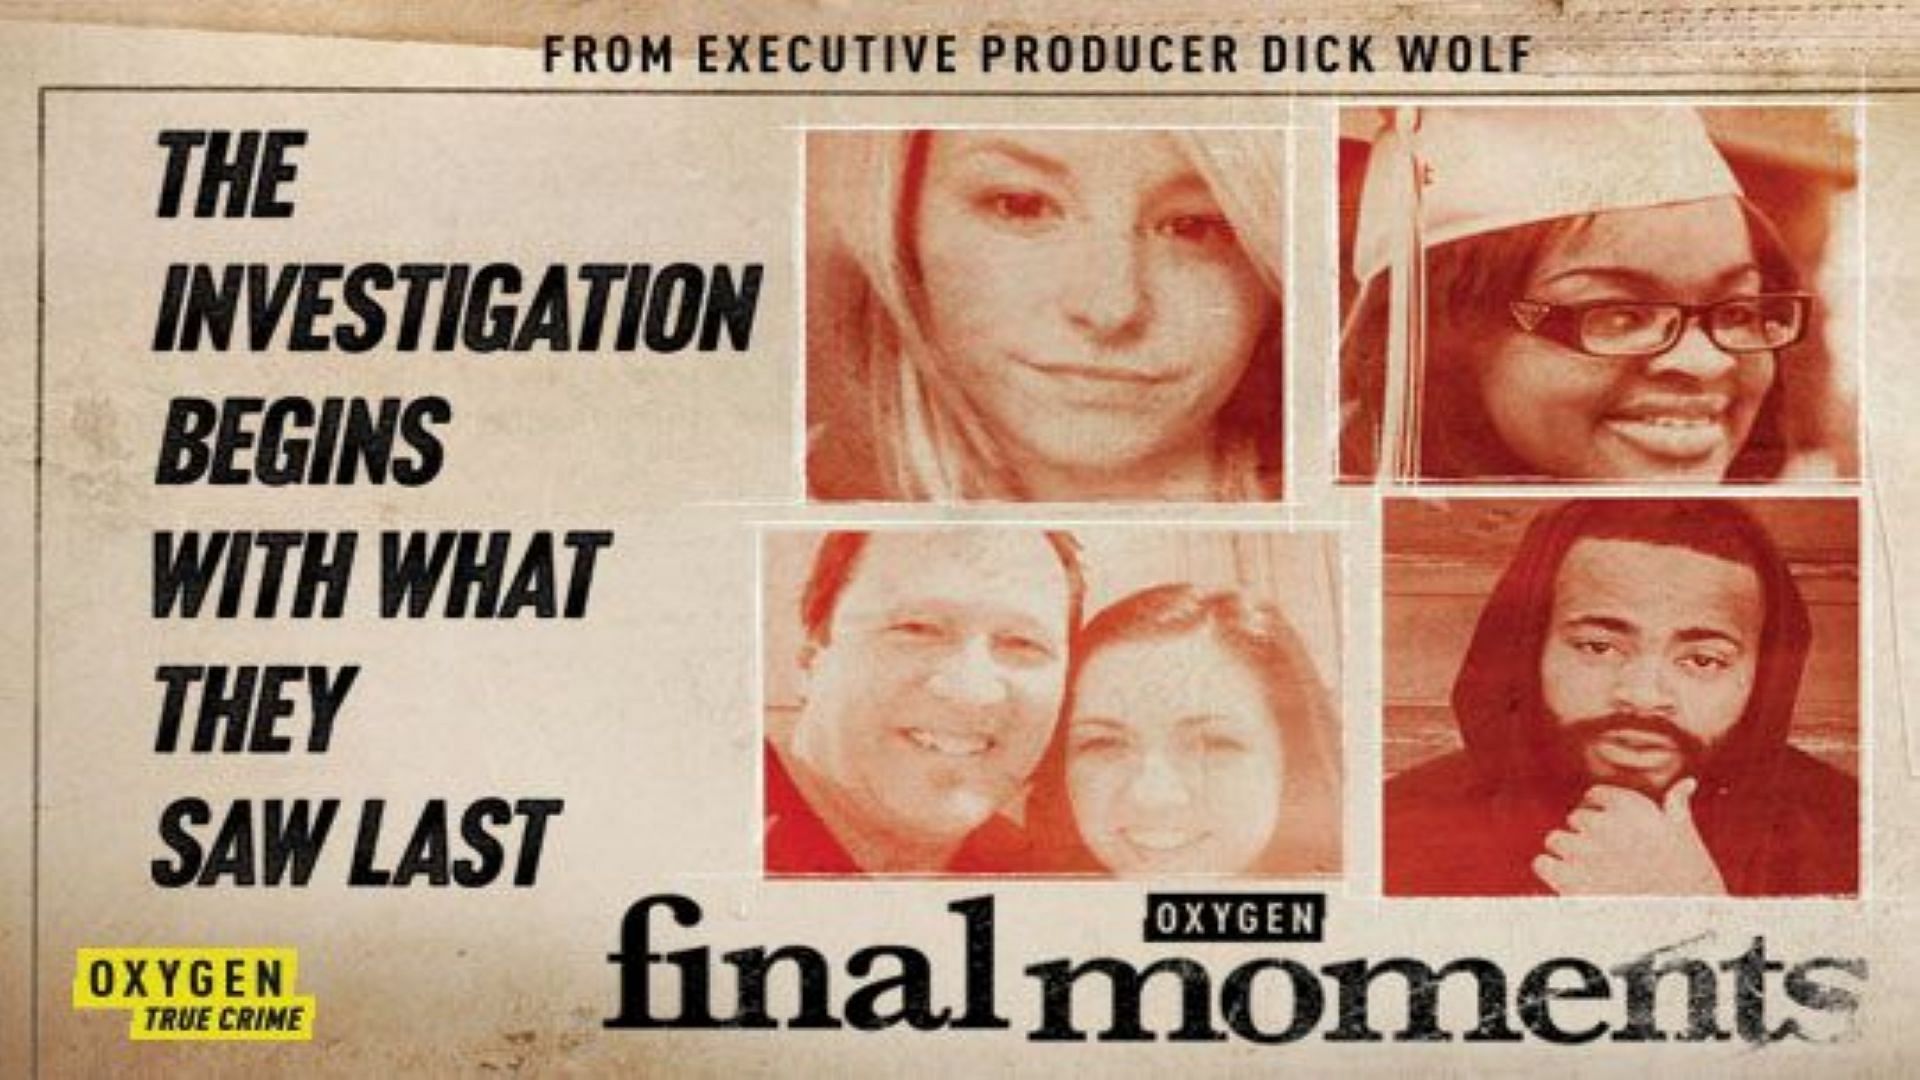 The official poster for Final Moments (Image via Oxygen)